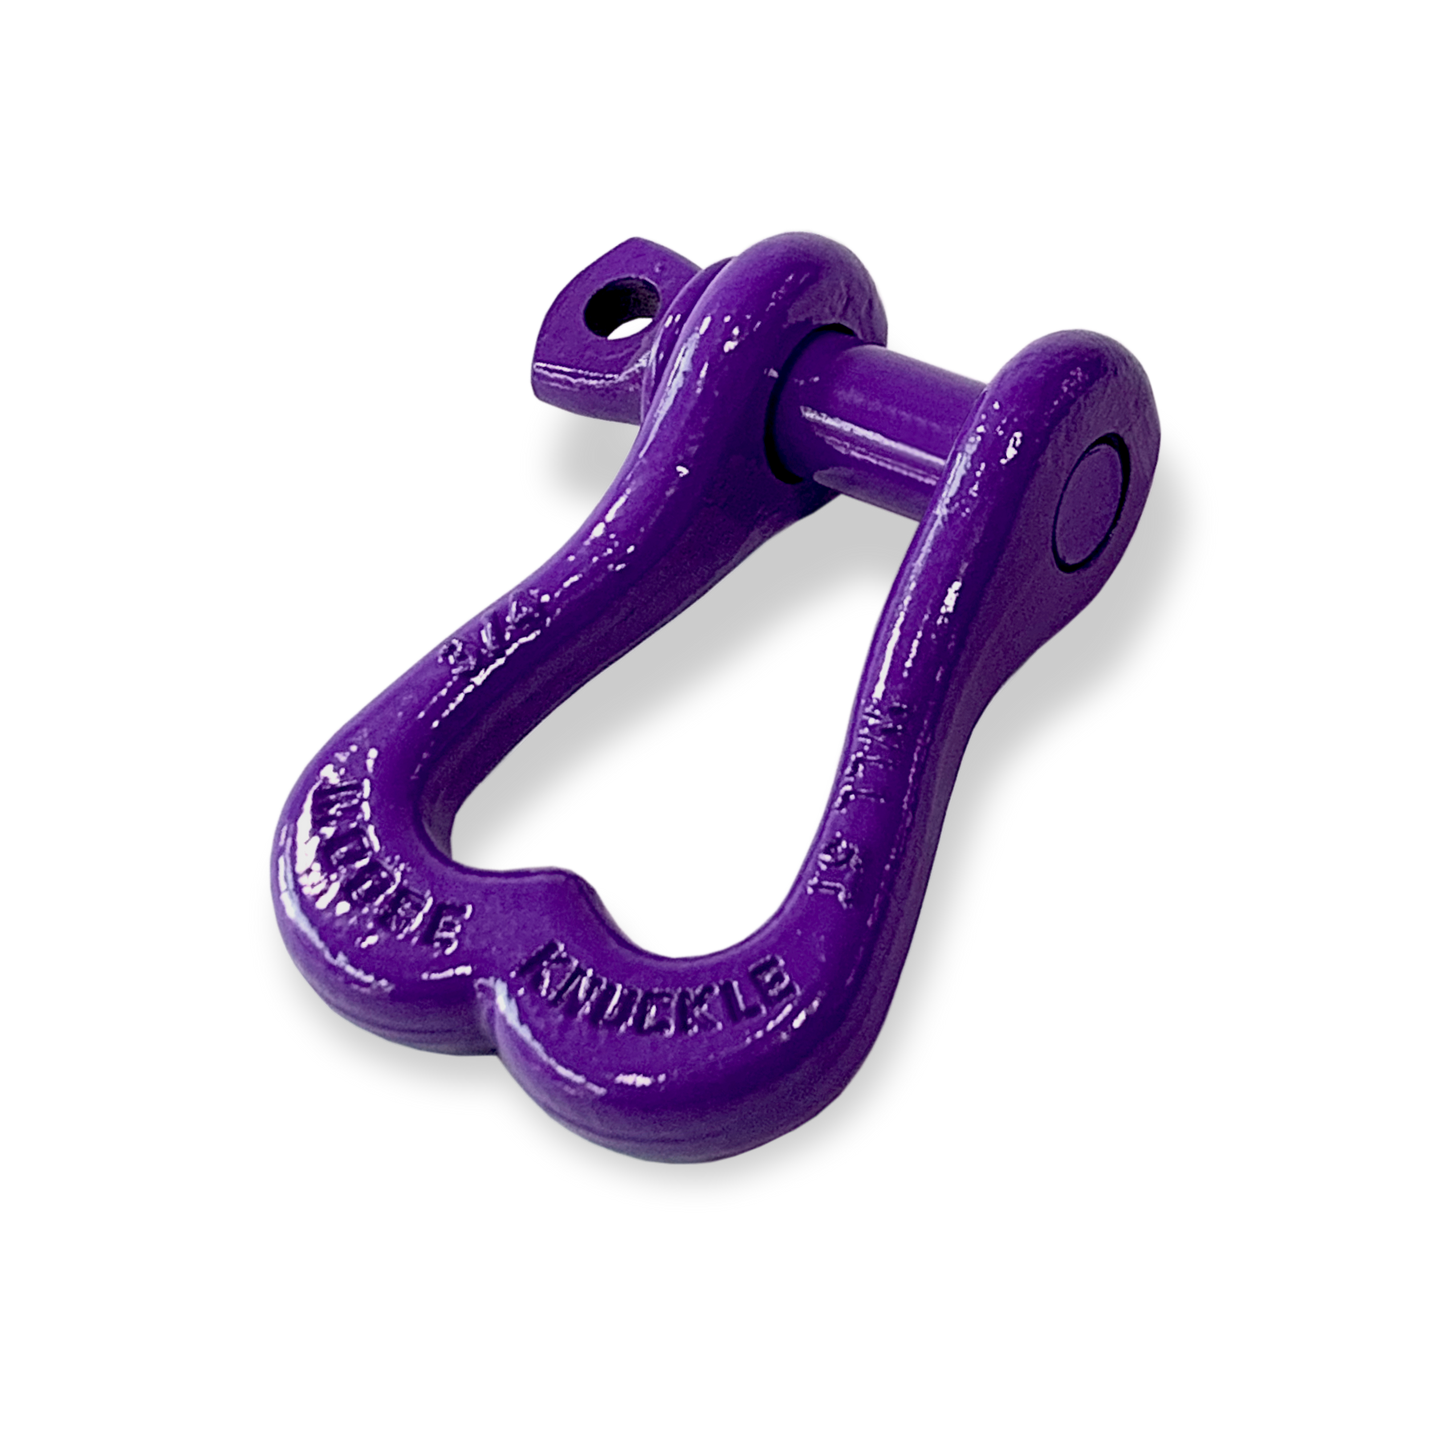 Moose Knuckle XL Grape Escape Purple Powder Coated Colored Shackle for Tow Straps, Off Roading and Truck Nuts Vehicle Recovery